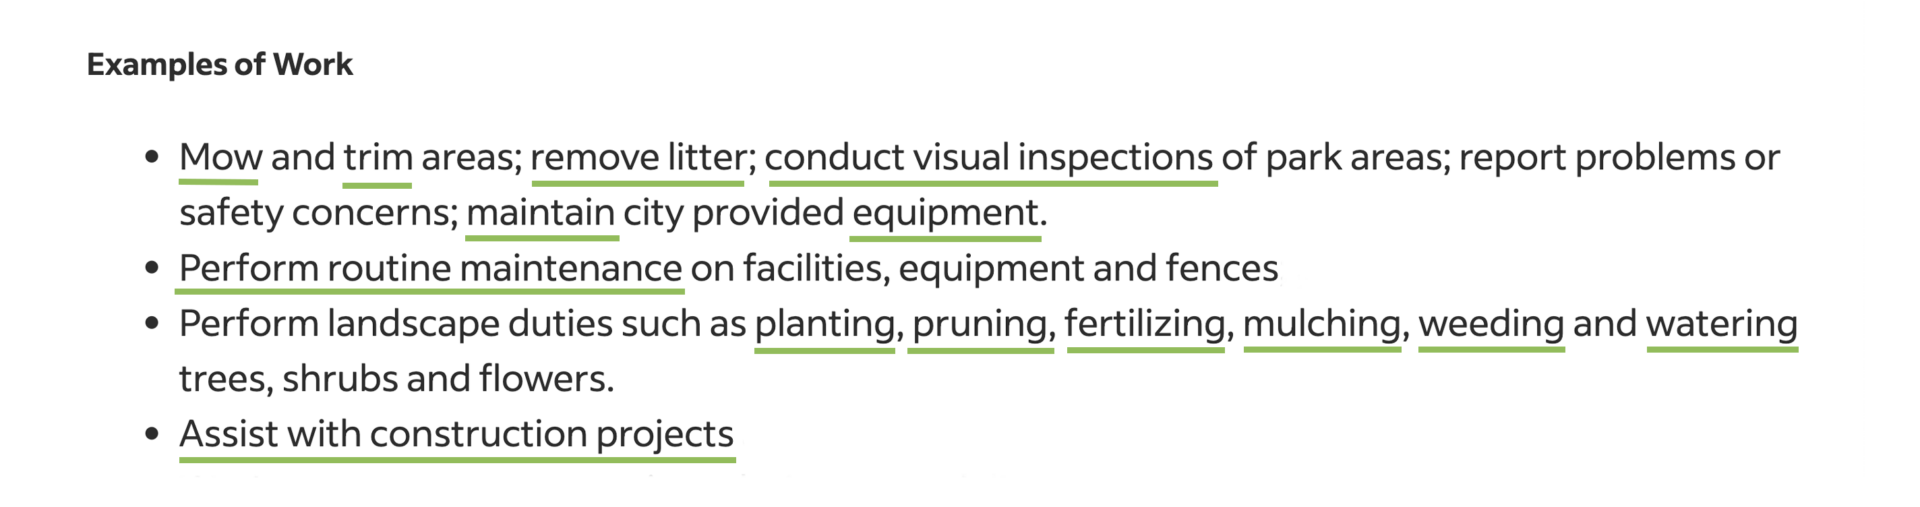 A bulleted list of responsibilities from a landscaping job description.